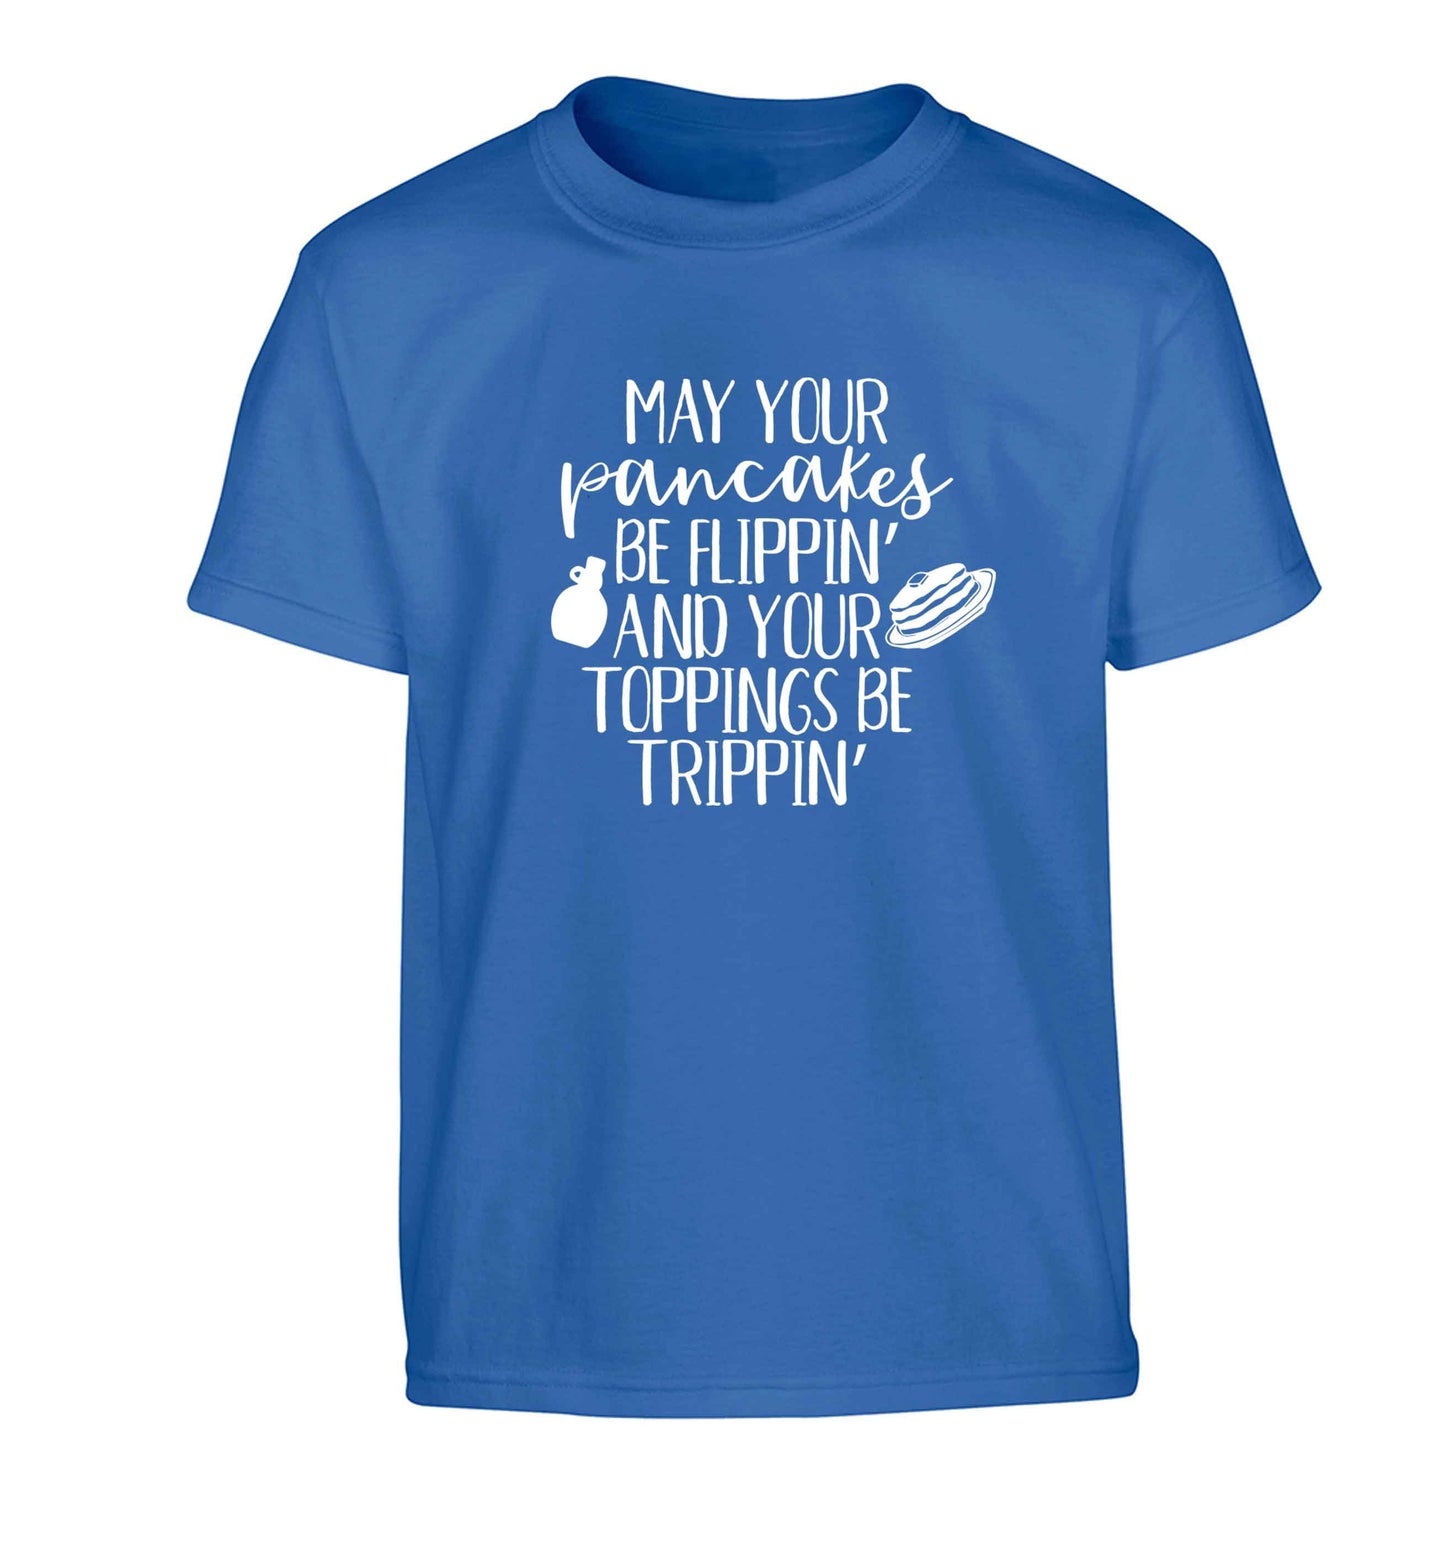 May your pancakes be flippin' and your toppings be trippin' Children's blue Tshirt 12-13 Years